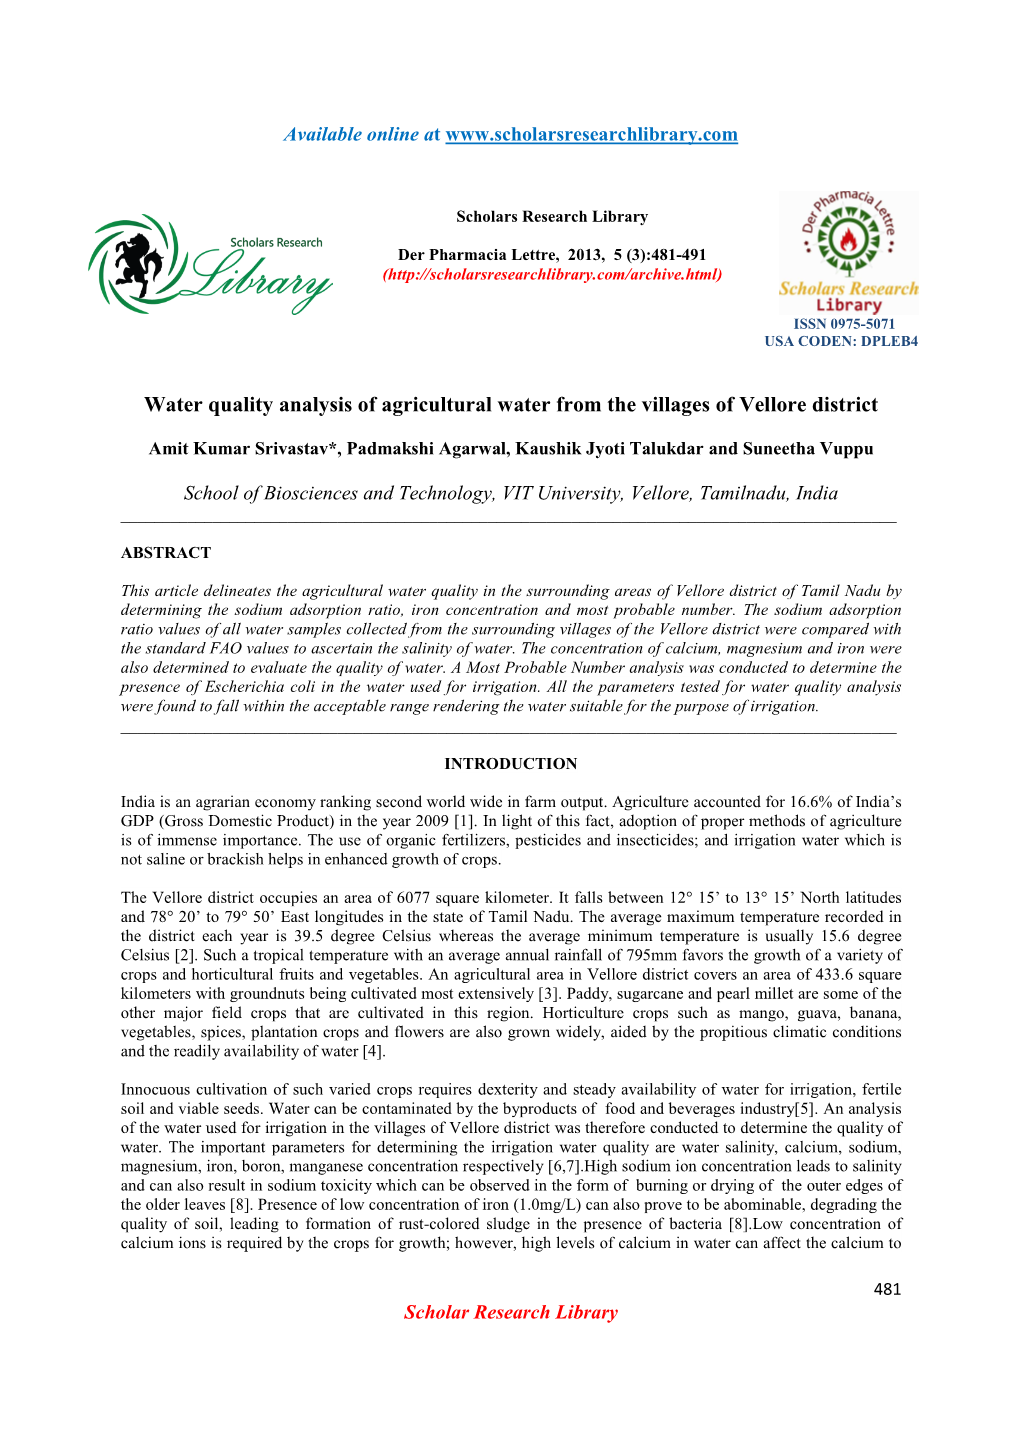 Water Quality Analysis of Agricultural Water from the Villages of Vellore District